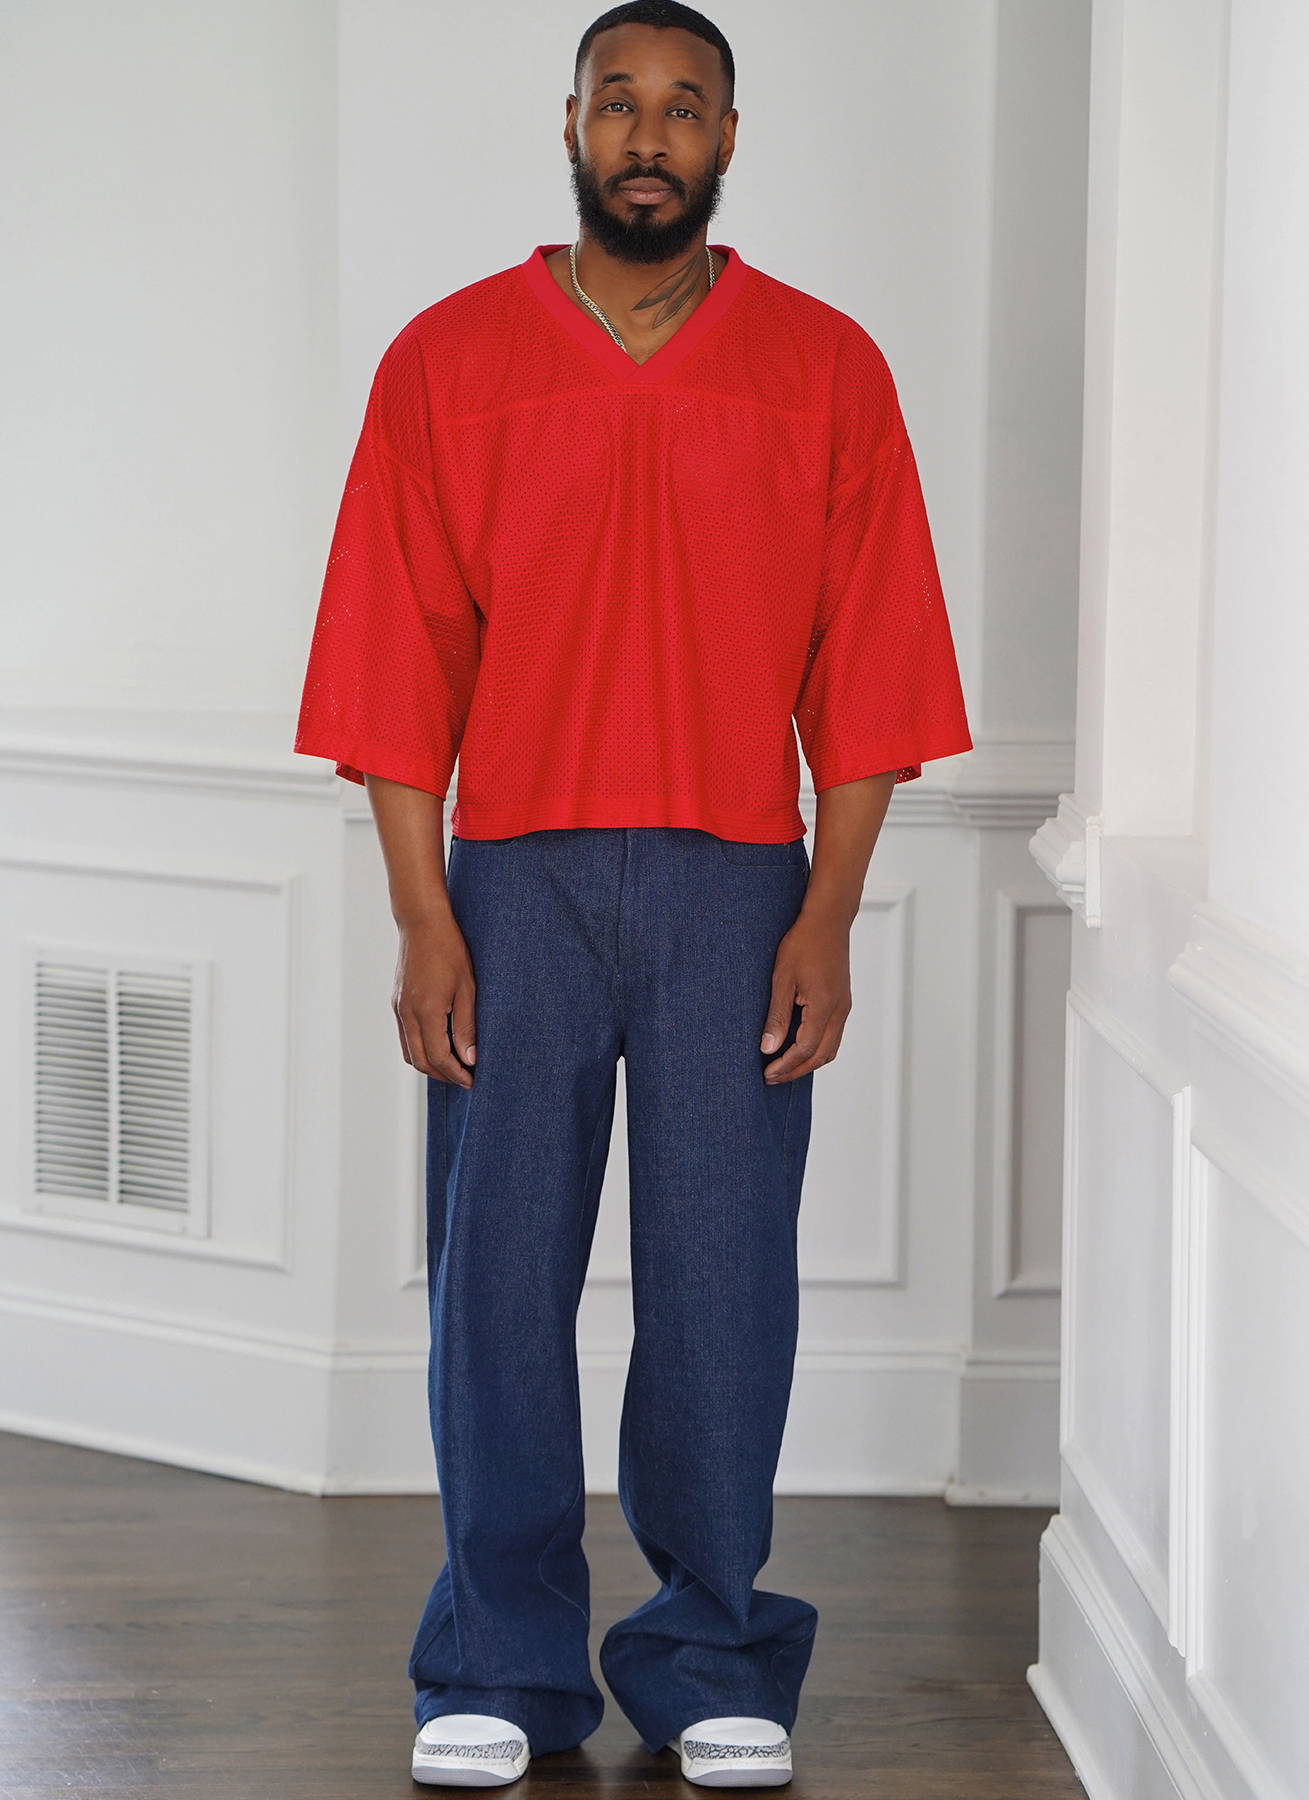 Male model in red shirt and denim pants